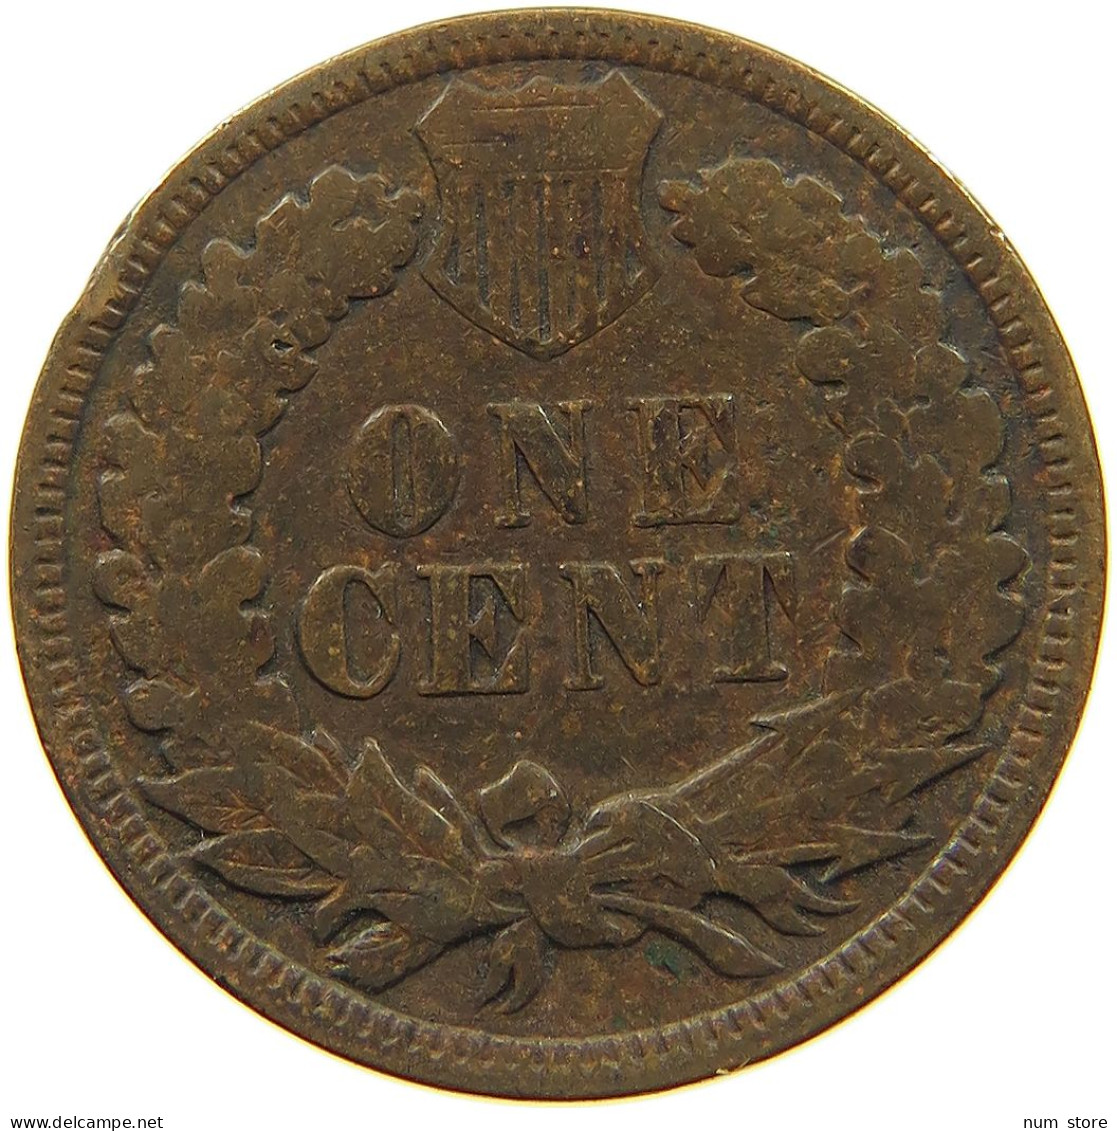 UNITED STATES OF AMERICA CENT 1895 INDIAN HEAD #c022 0557 - 1859-1909: Indian Head